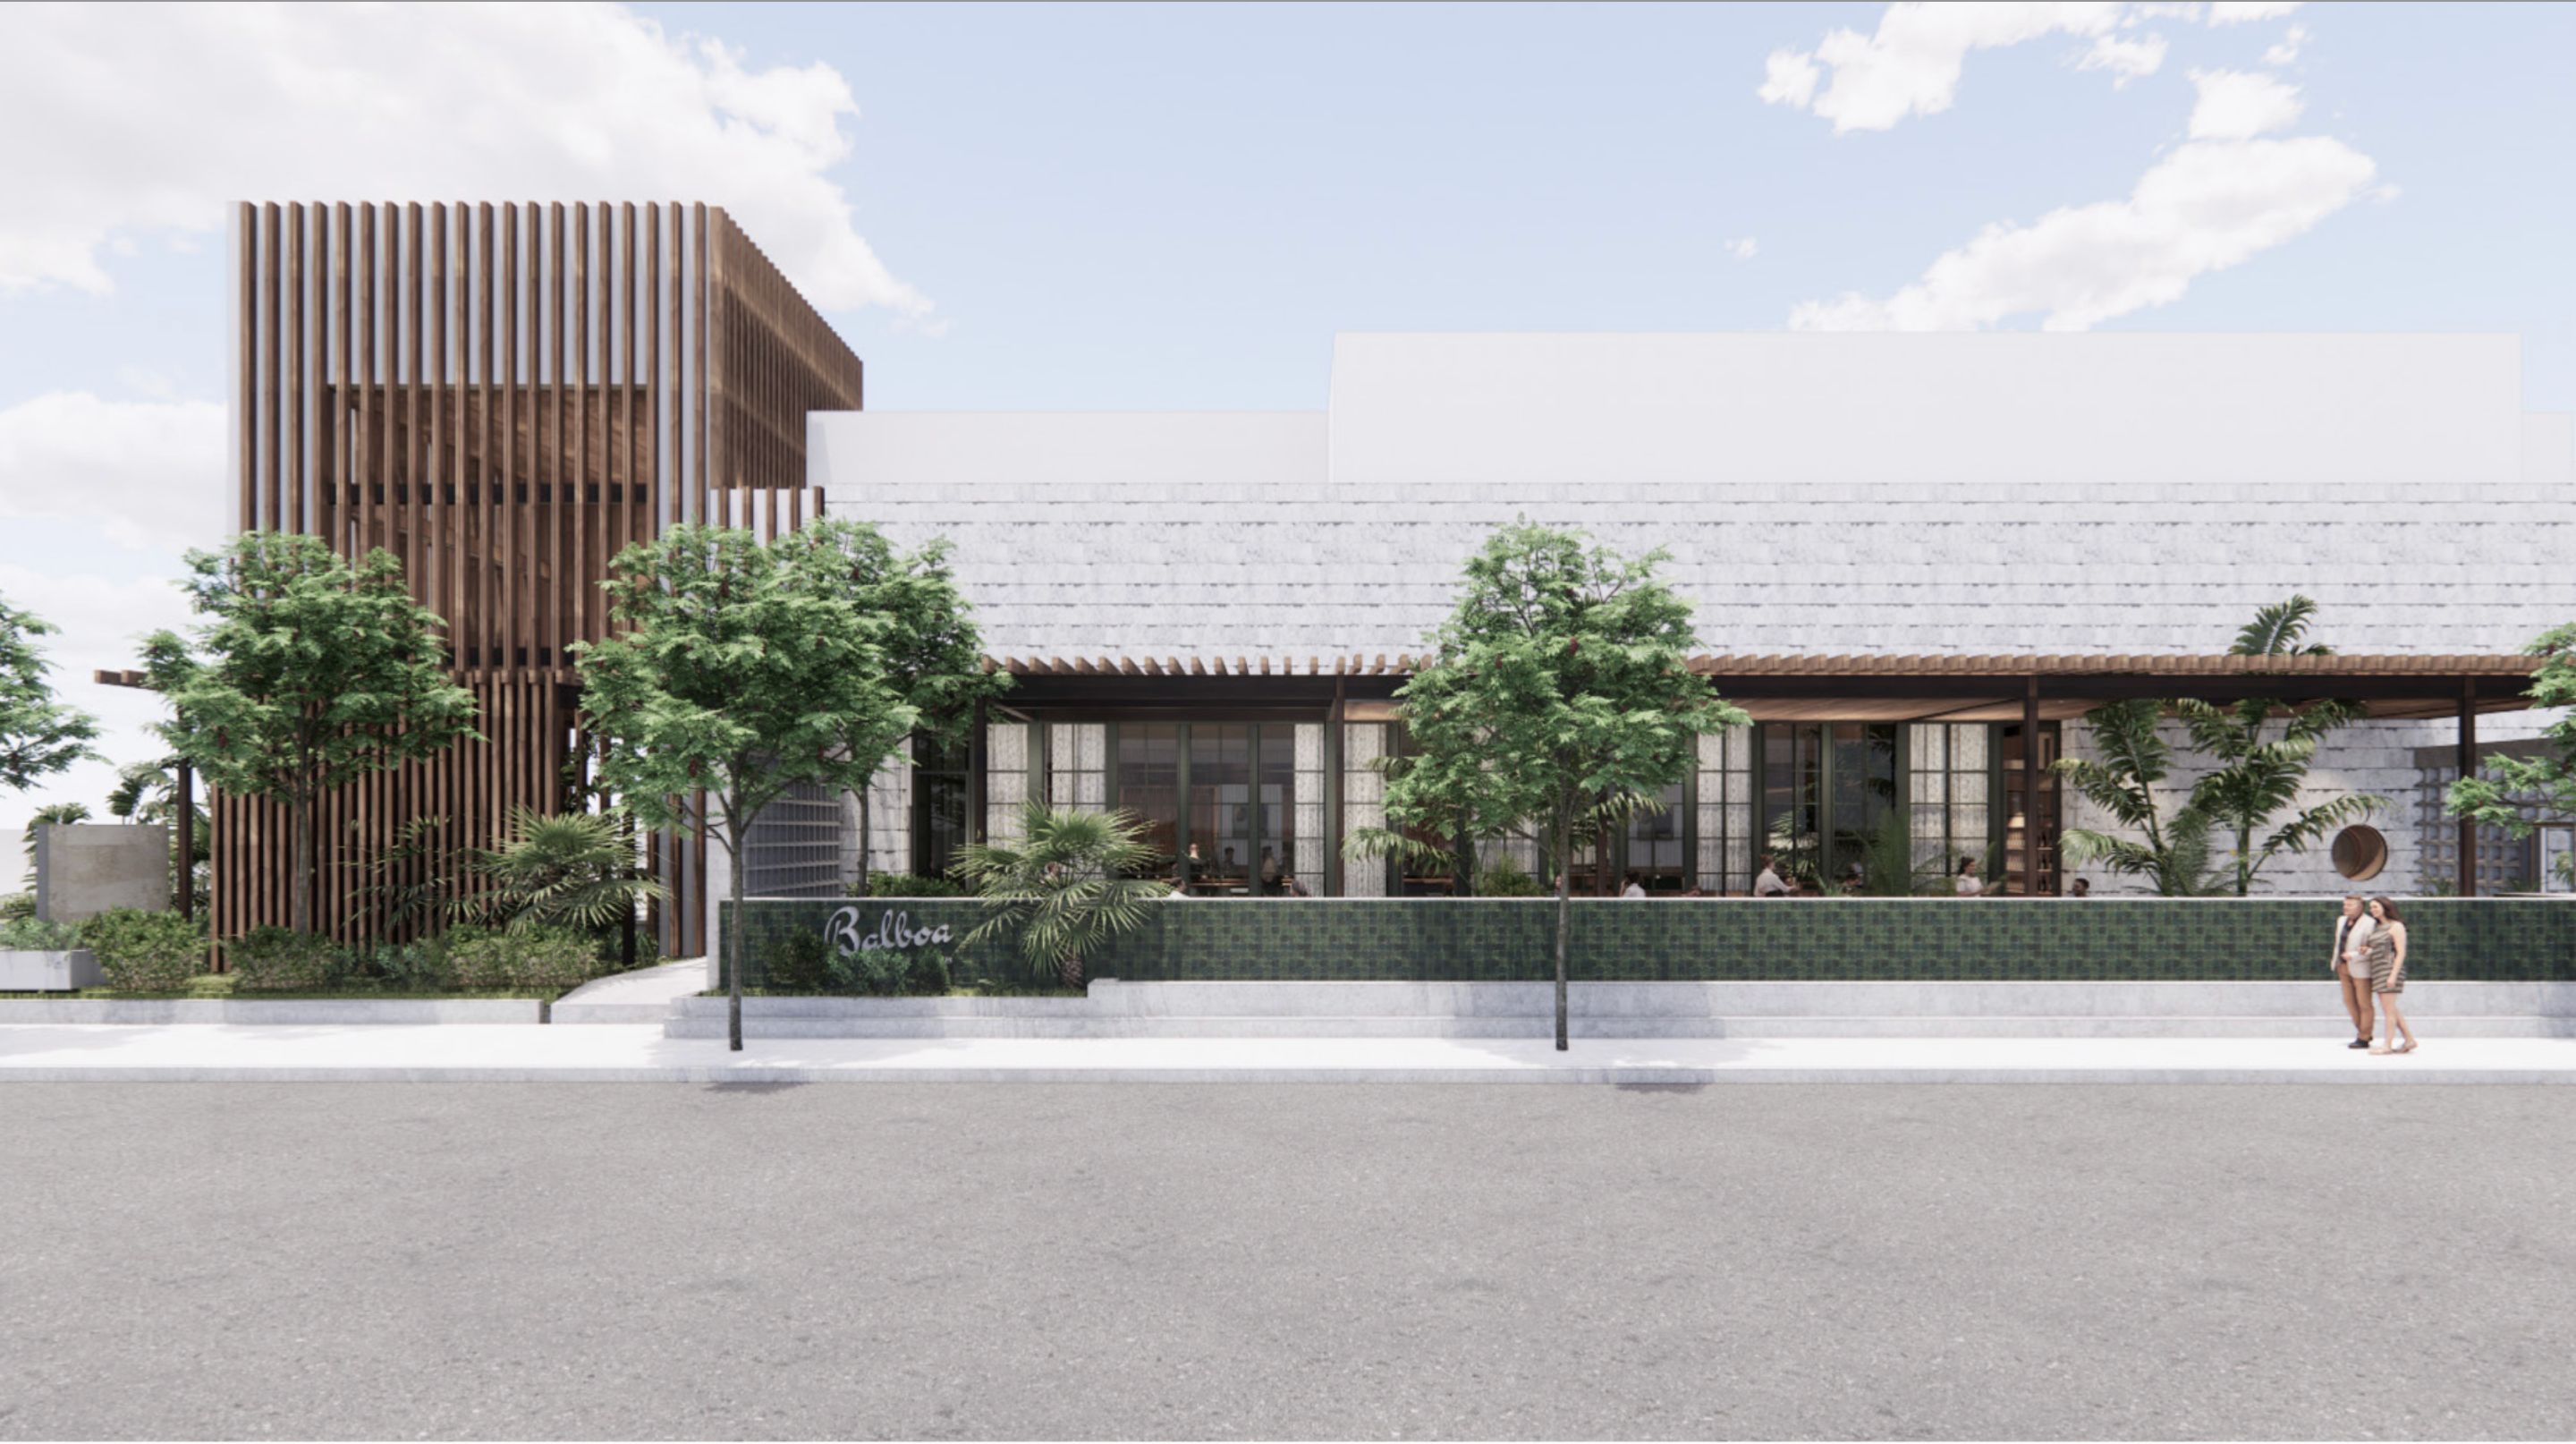 An artist rendering of Balboa Surf Club’s exterior.